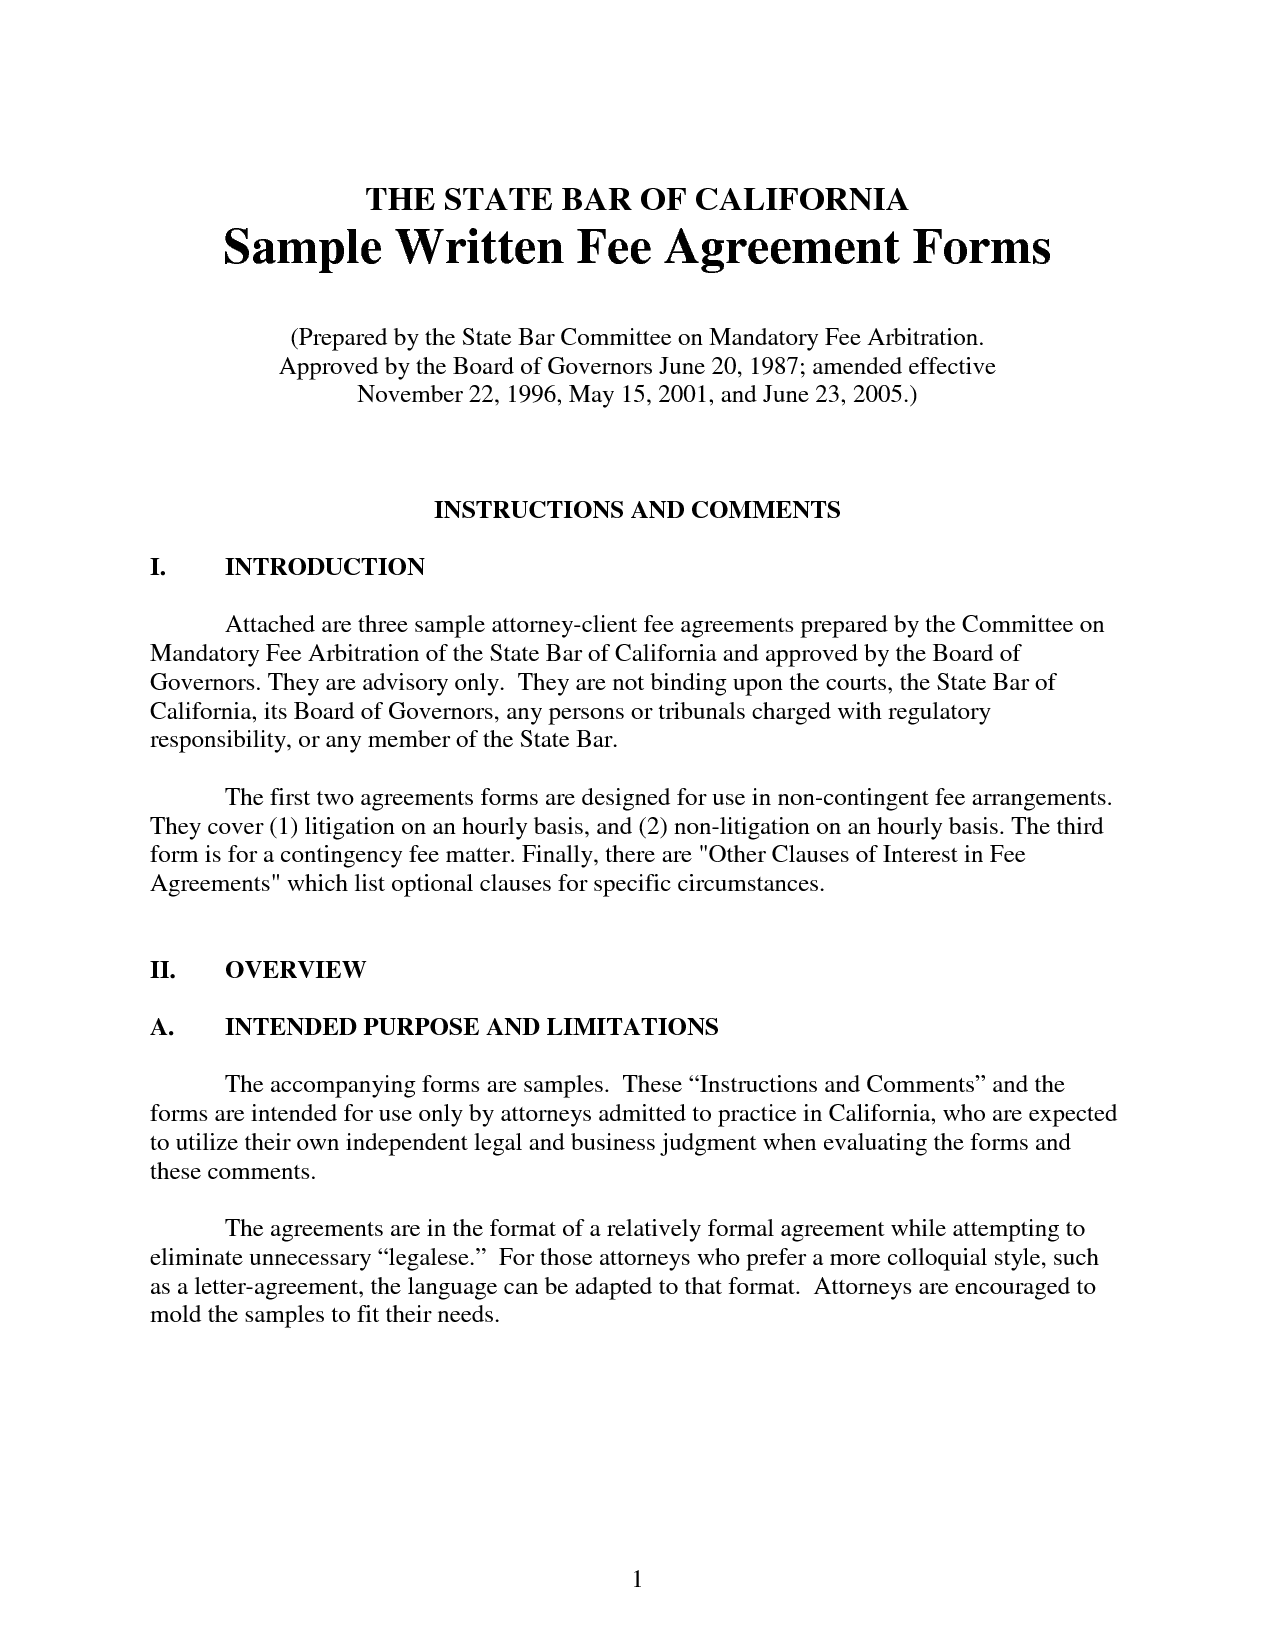 legal agreement form by tricky legal agreement forms | Real 